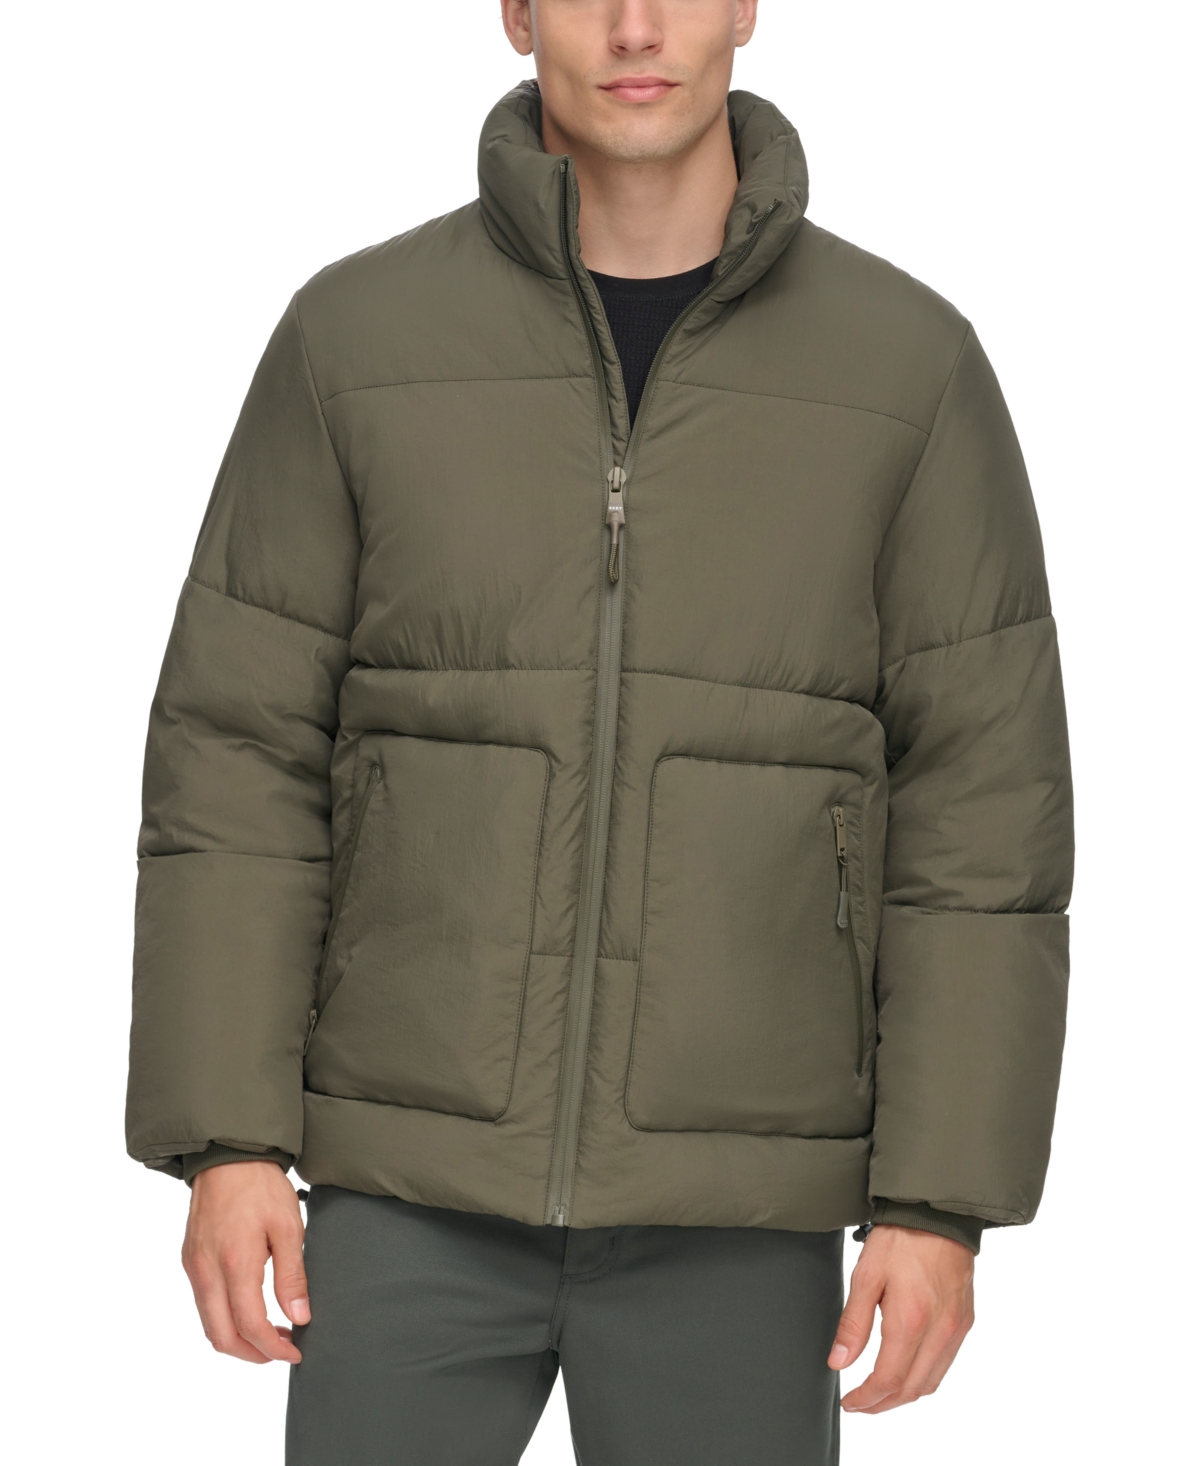 Dkny Men's Refined Quilted Full-zip Stand Collar Puffer Jacket In Olive